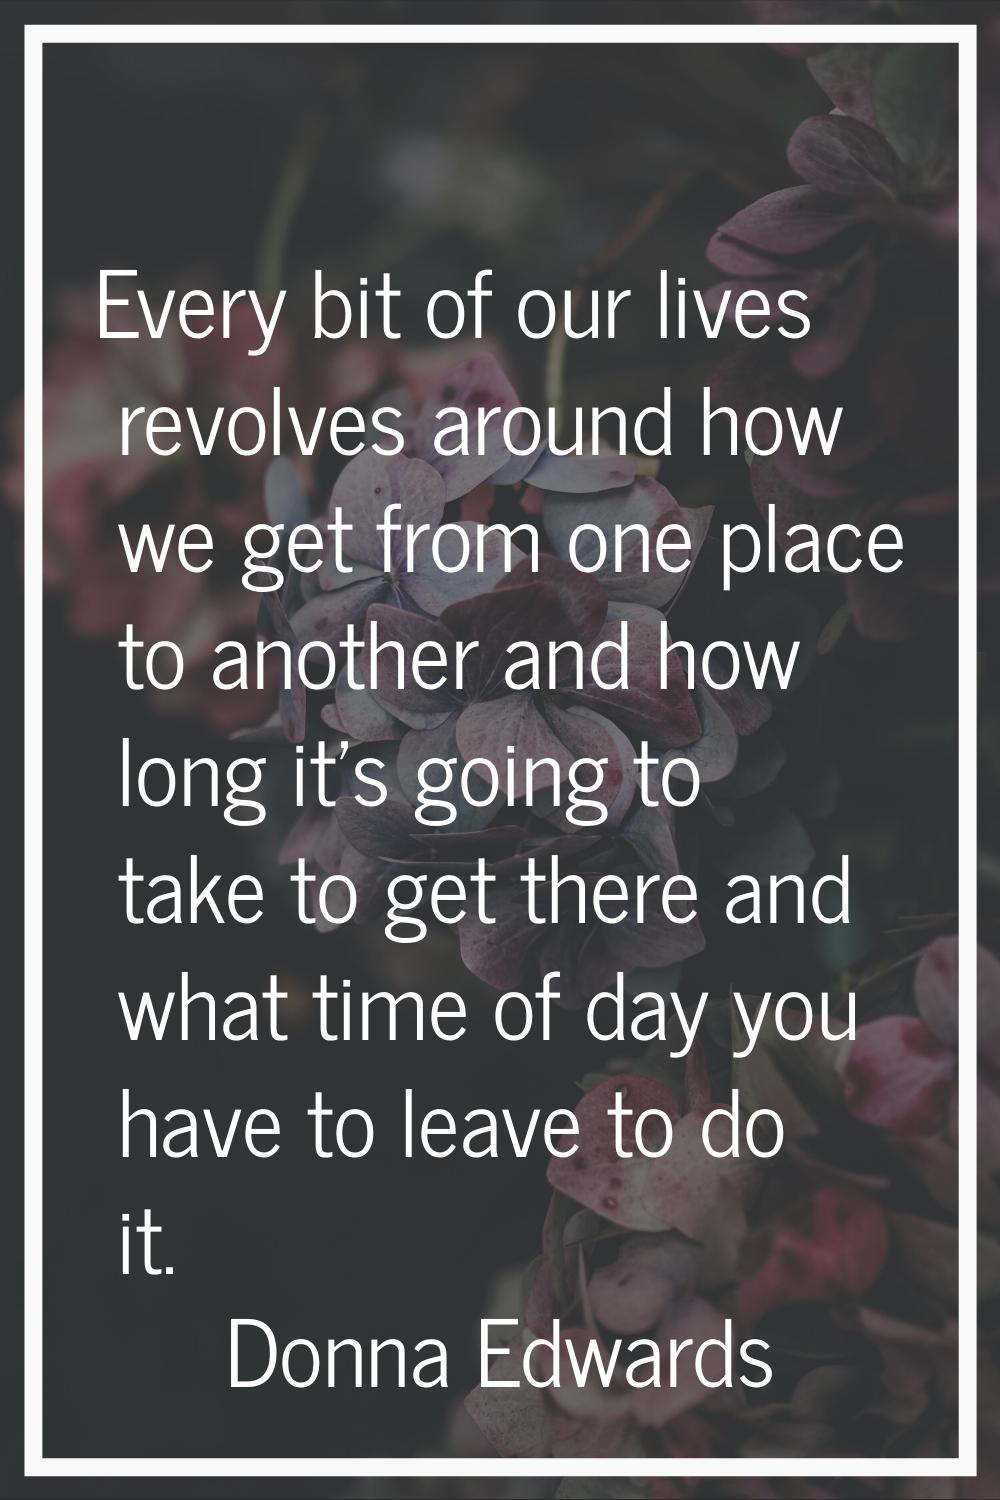 Every bit of our lives revolves around how we get from one place to another and how long it's going